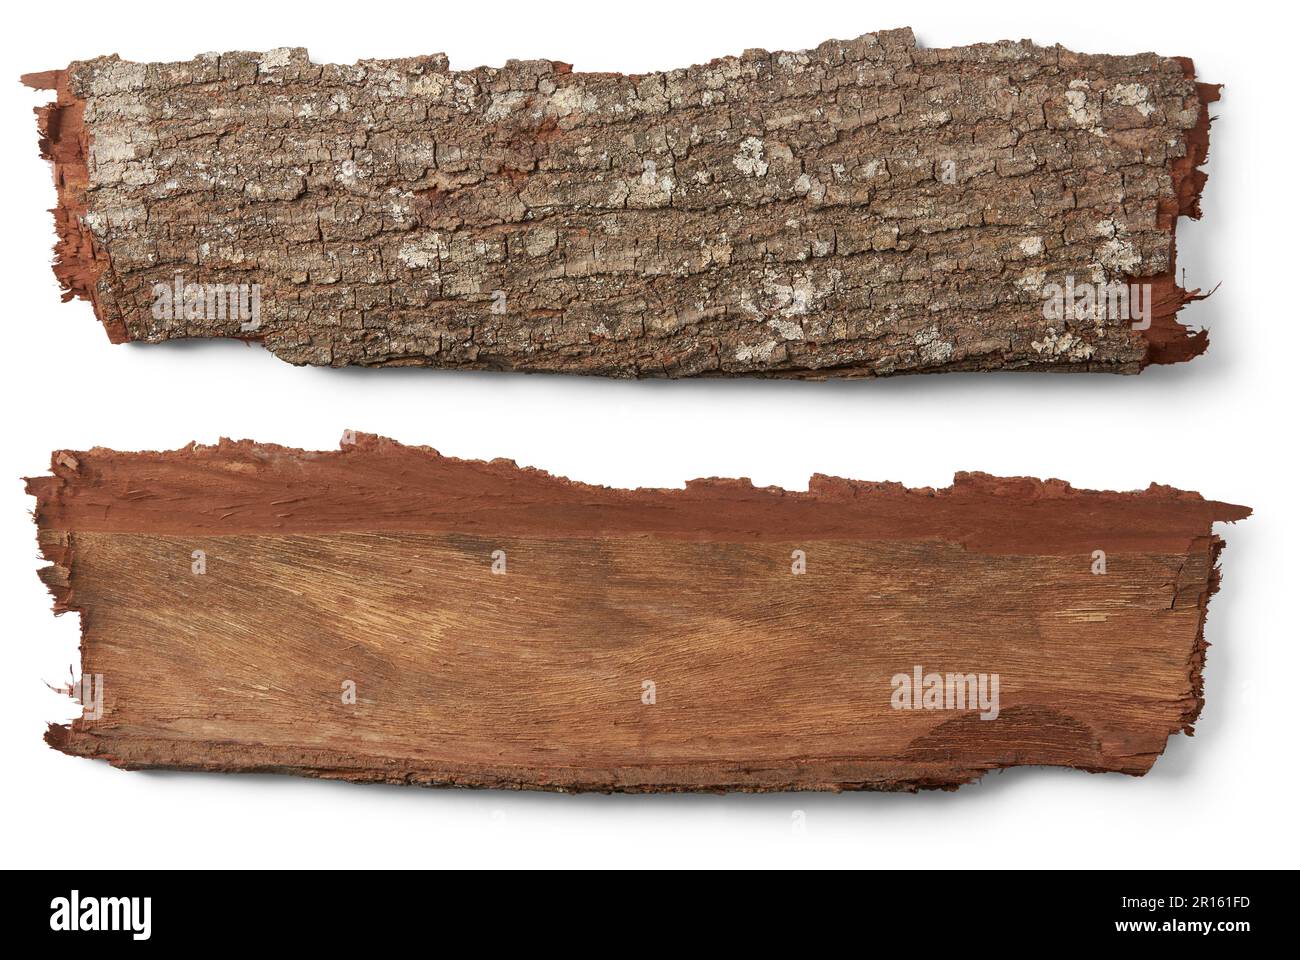 outermost layer of tree trunk, reddish brown hardwood tree bark isolated on white background, both sides of rough, textured bark, natural signpost Stock Photo